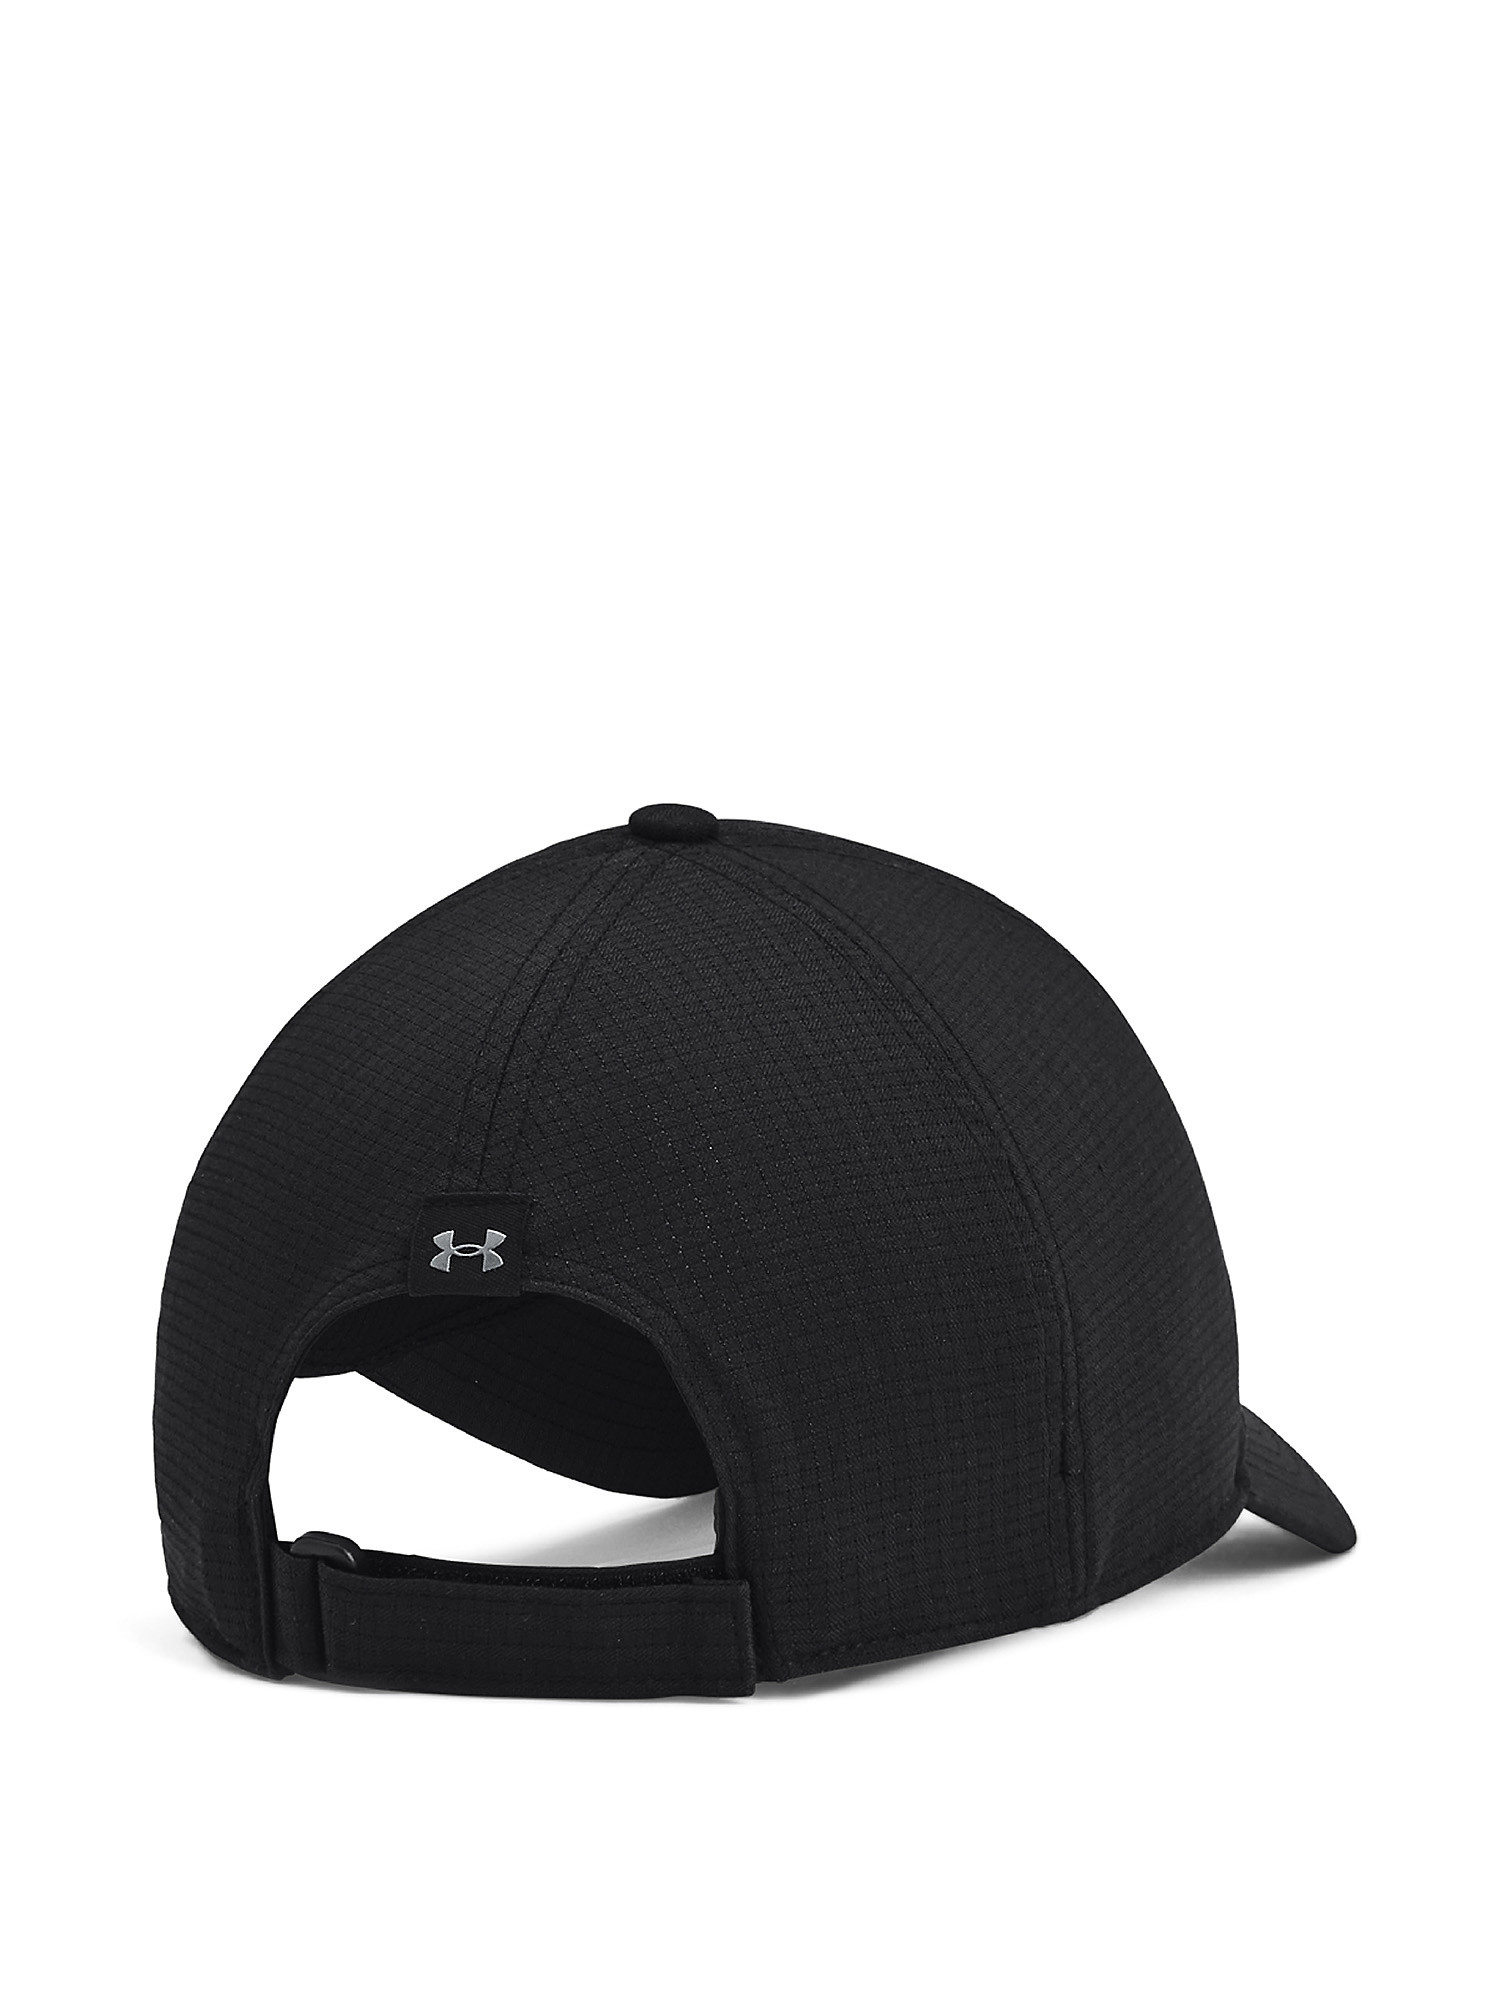 Under Armour - UA Iso-Chill ArmourVent™ Adjustable hat, Black, large image number 1